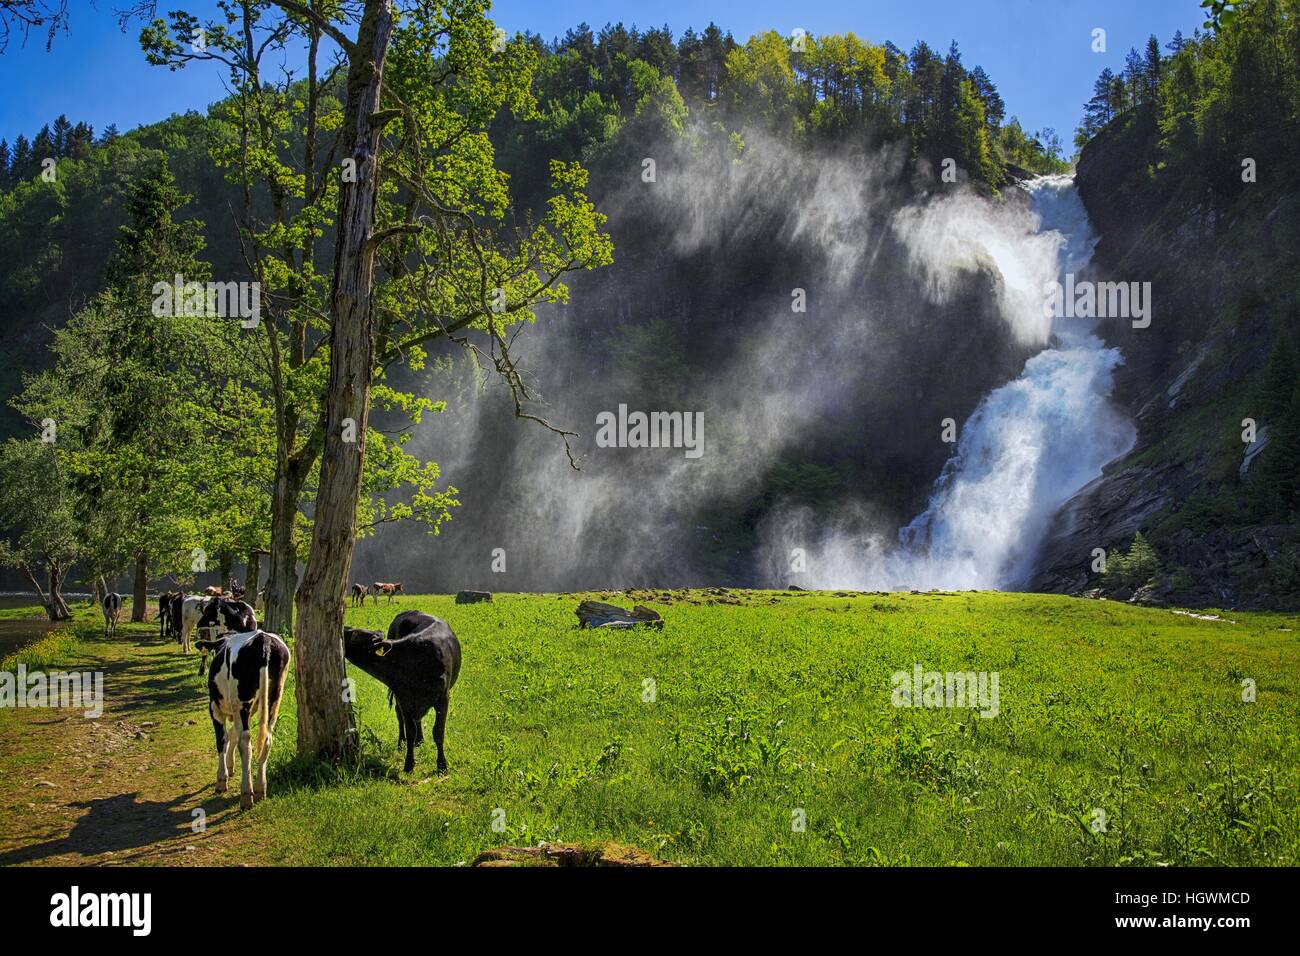 The majestic Hulderfossen waterfall, Sogn og Fjordane, Norway with grazing cattle in the foreground. Stock Photo